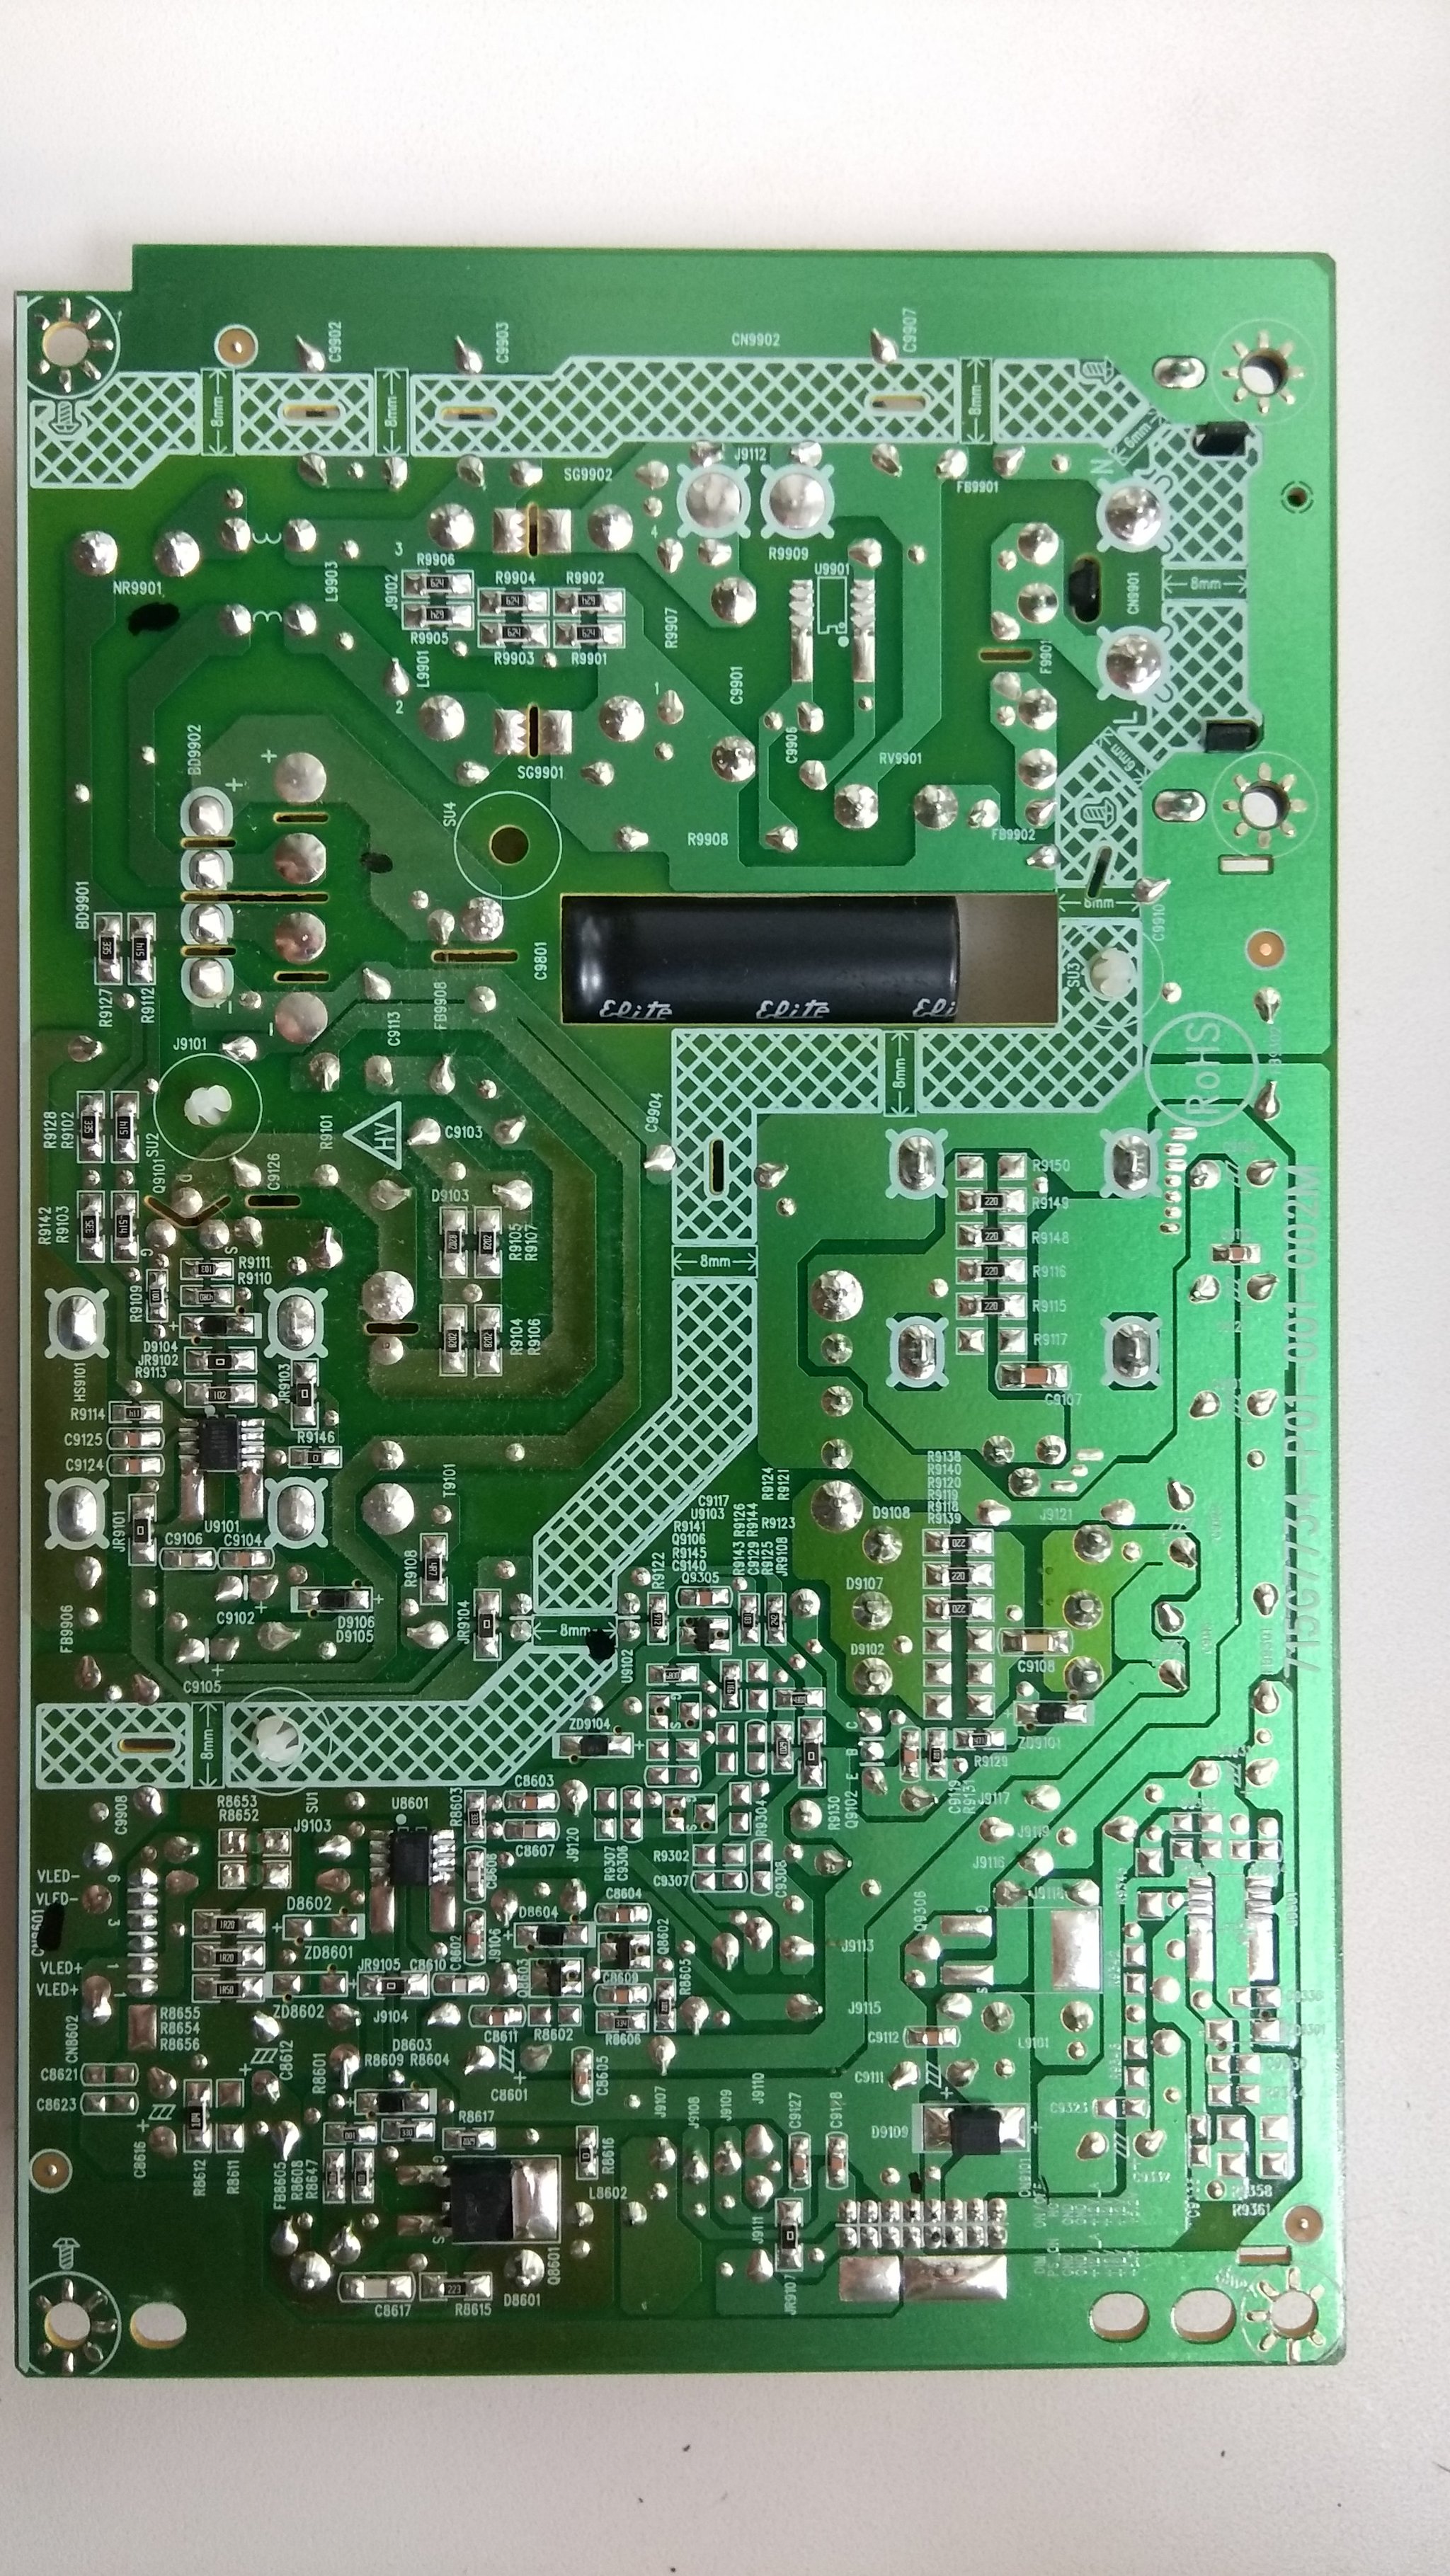 Reducing the backlight current on a Philips 32PHT4101/60 TV - My, Electronics repair, Backlight, Longpost